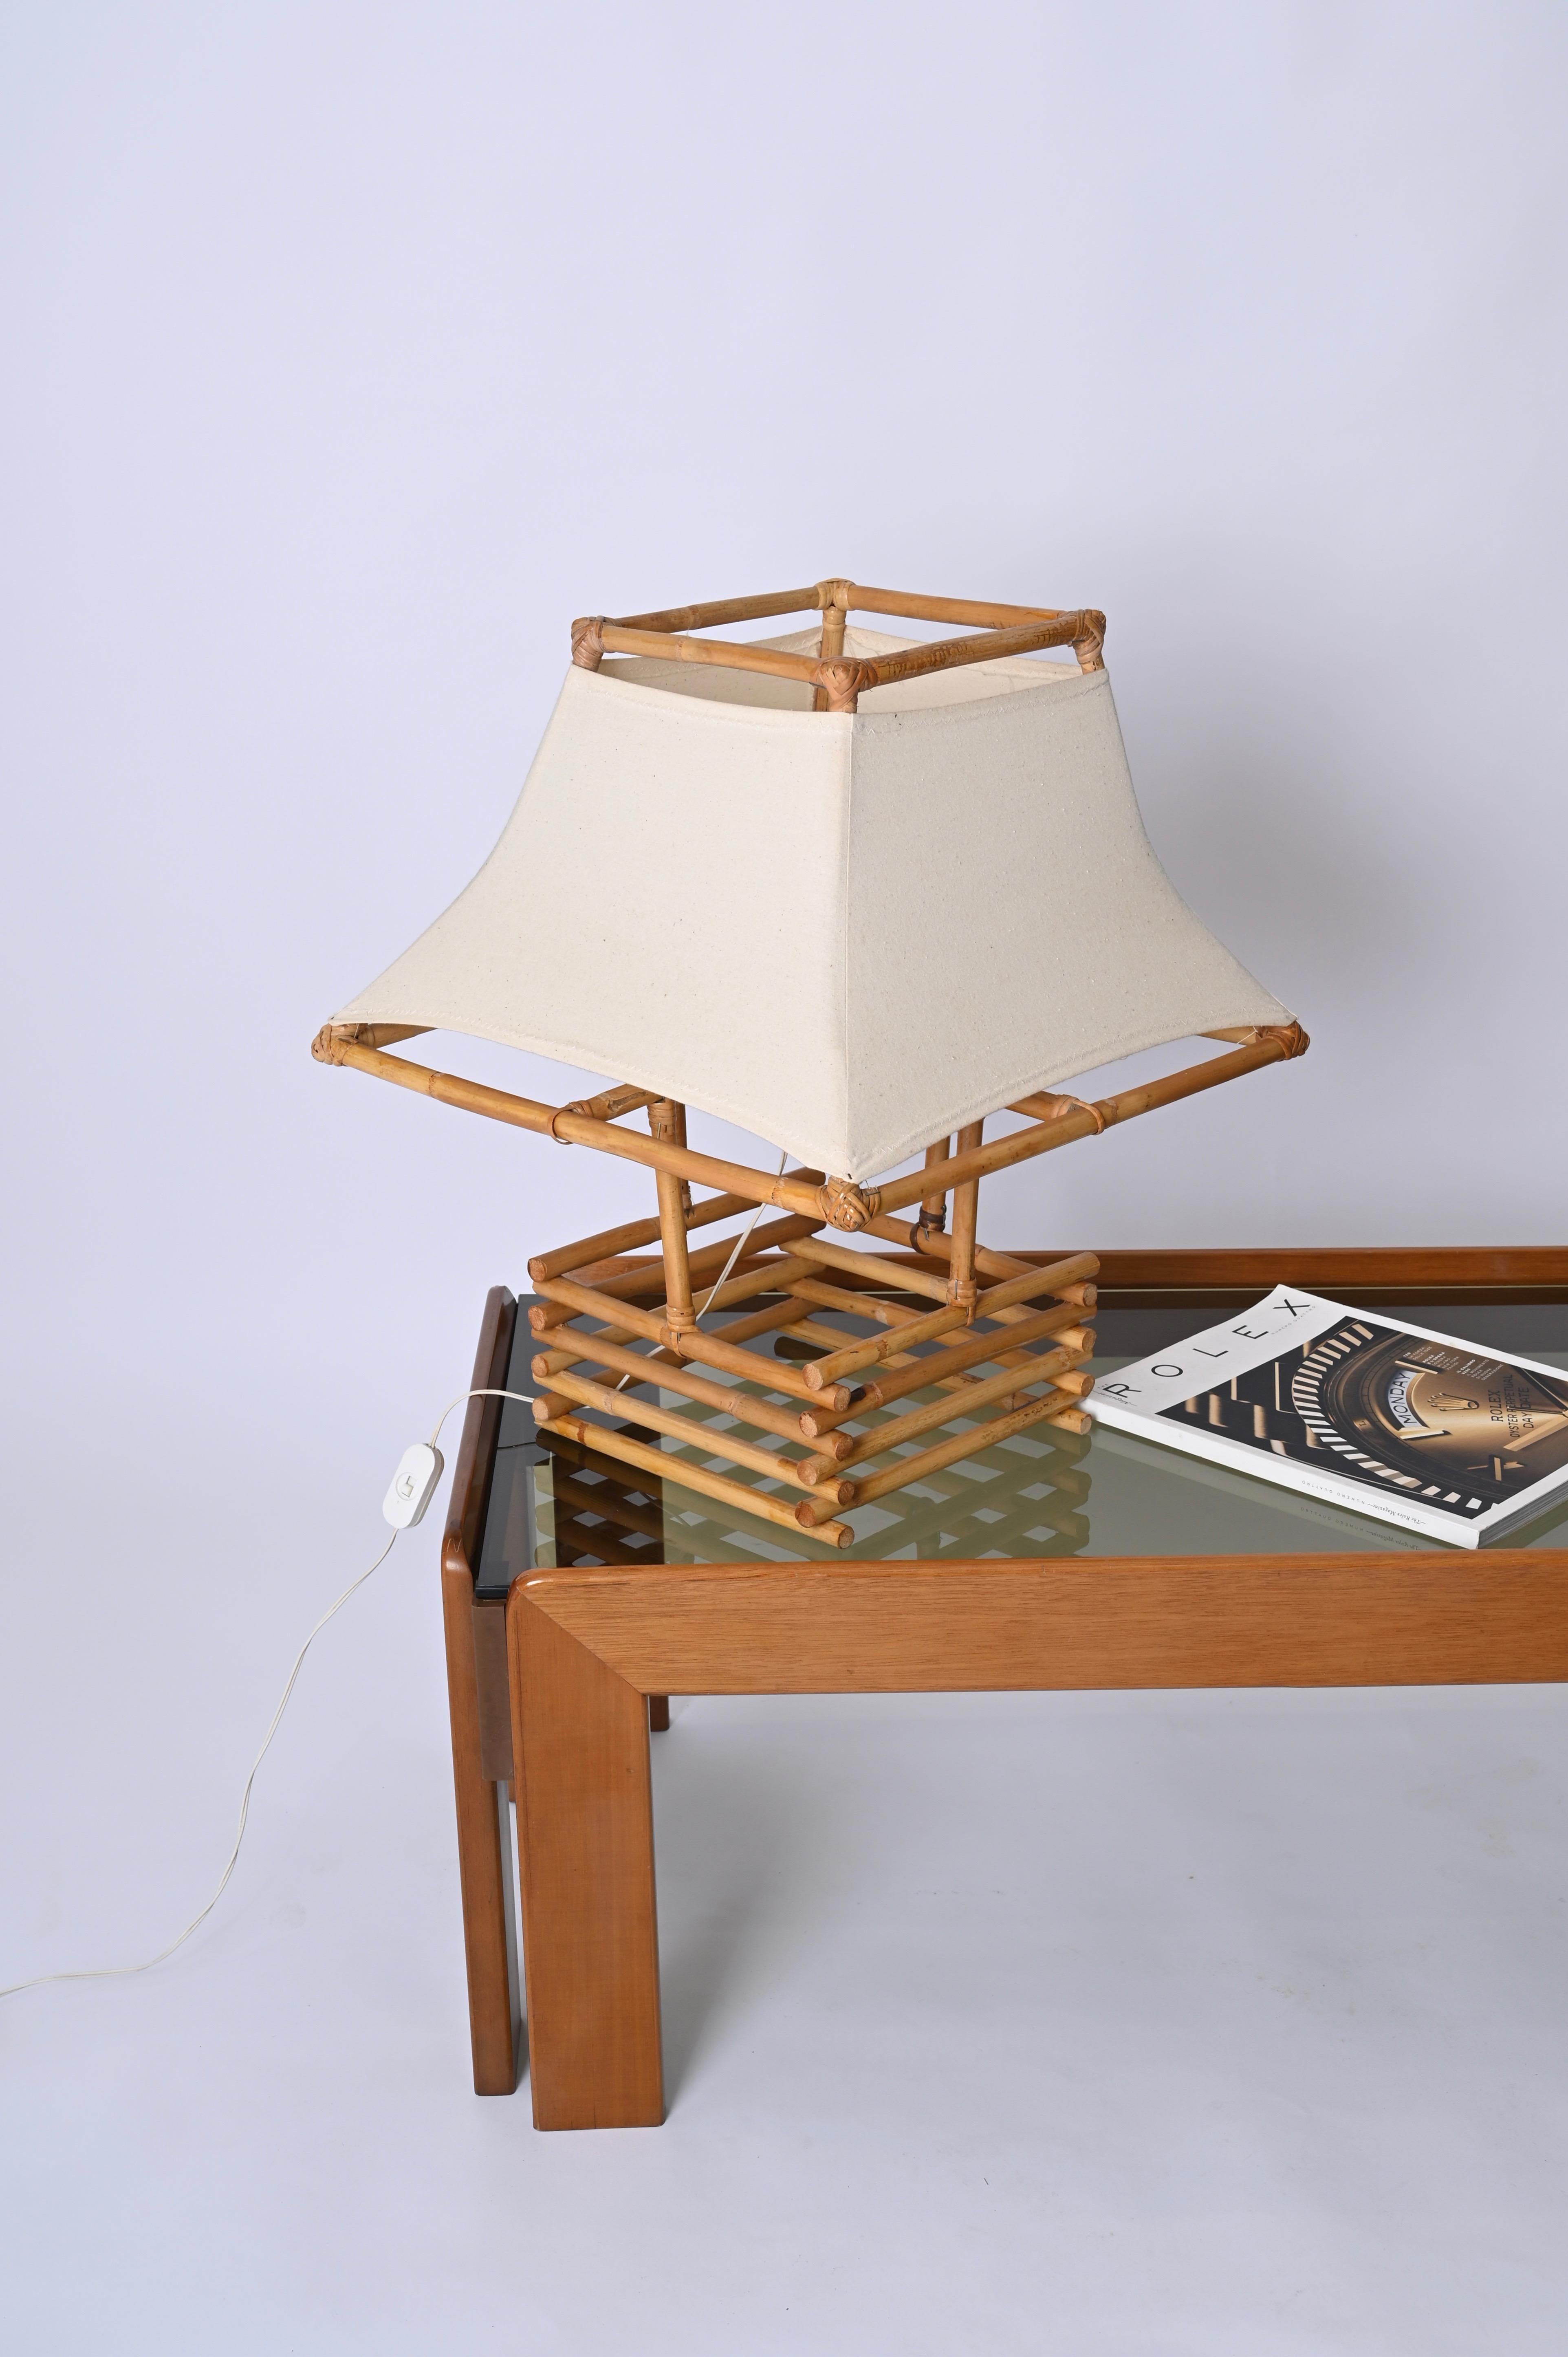 Fantastic large midcentury table lamp in rattan, bamboo and fabric. This lovely piece was made in France in the 1960s and is attributed to Louis Sognot.

The lamp is striking because of its dimensions and design.  It features a clear example of '60s